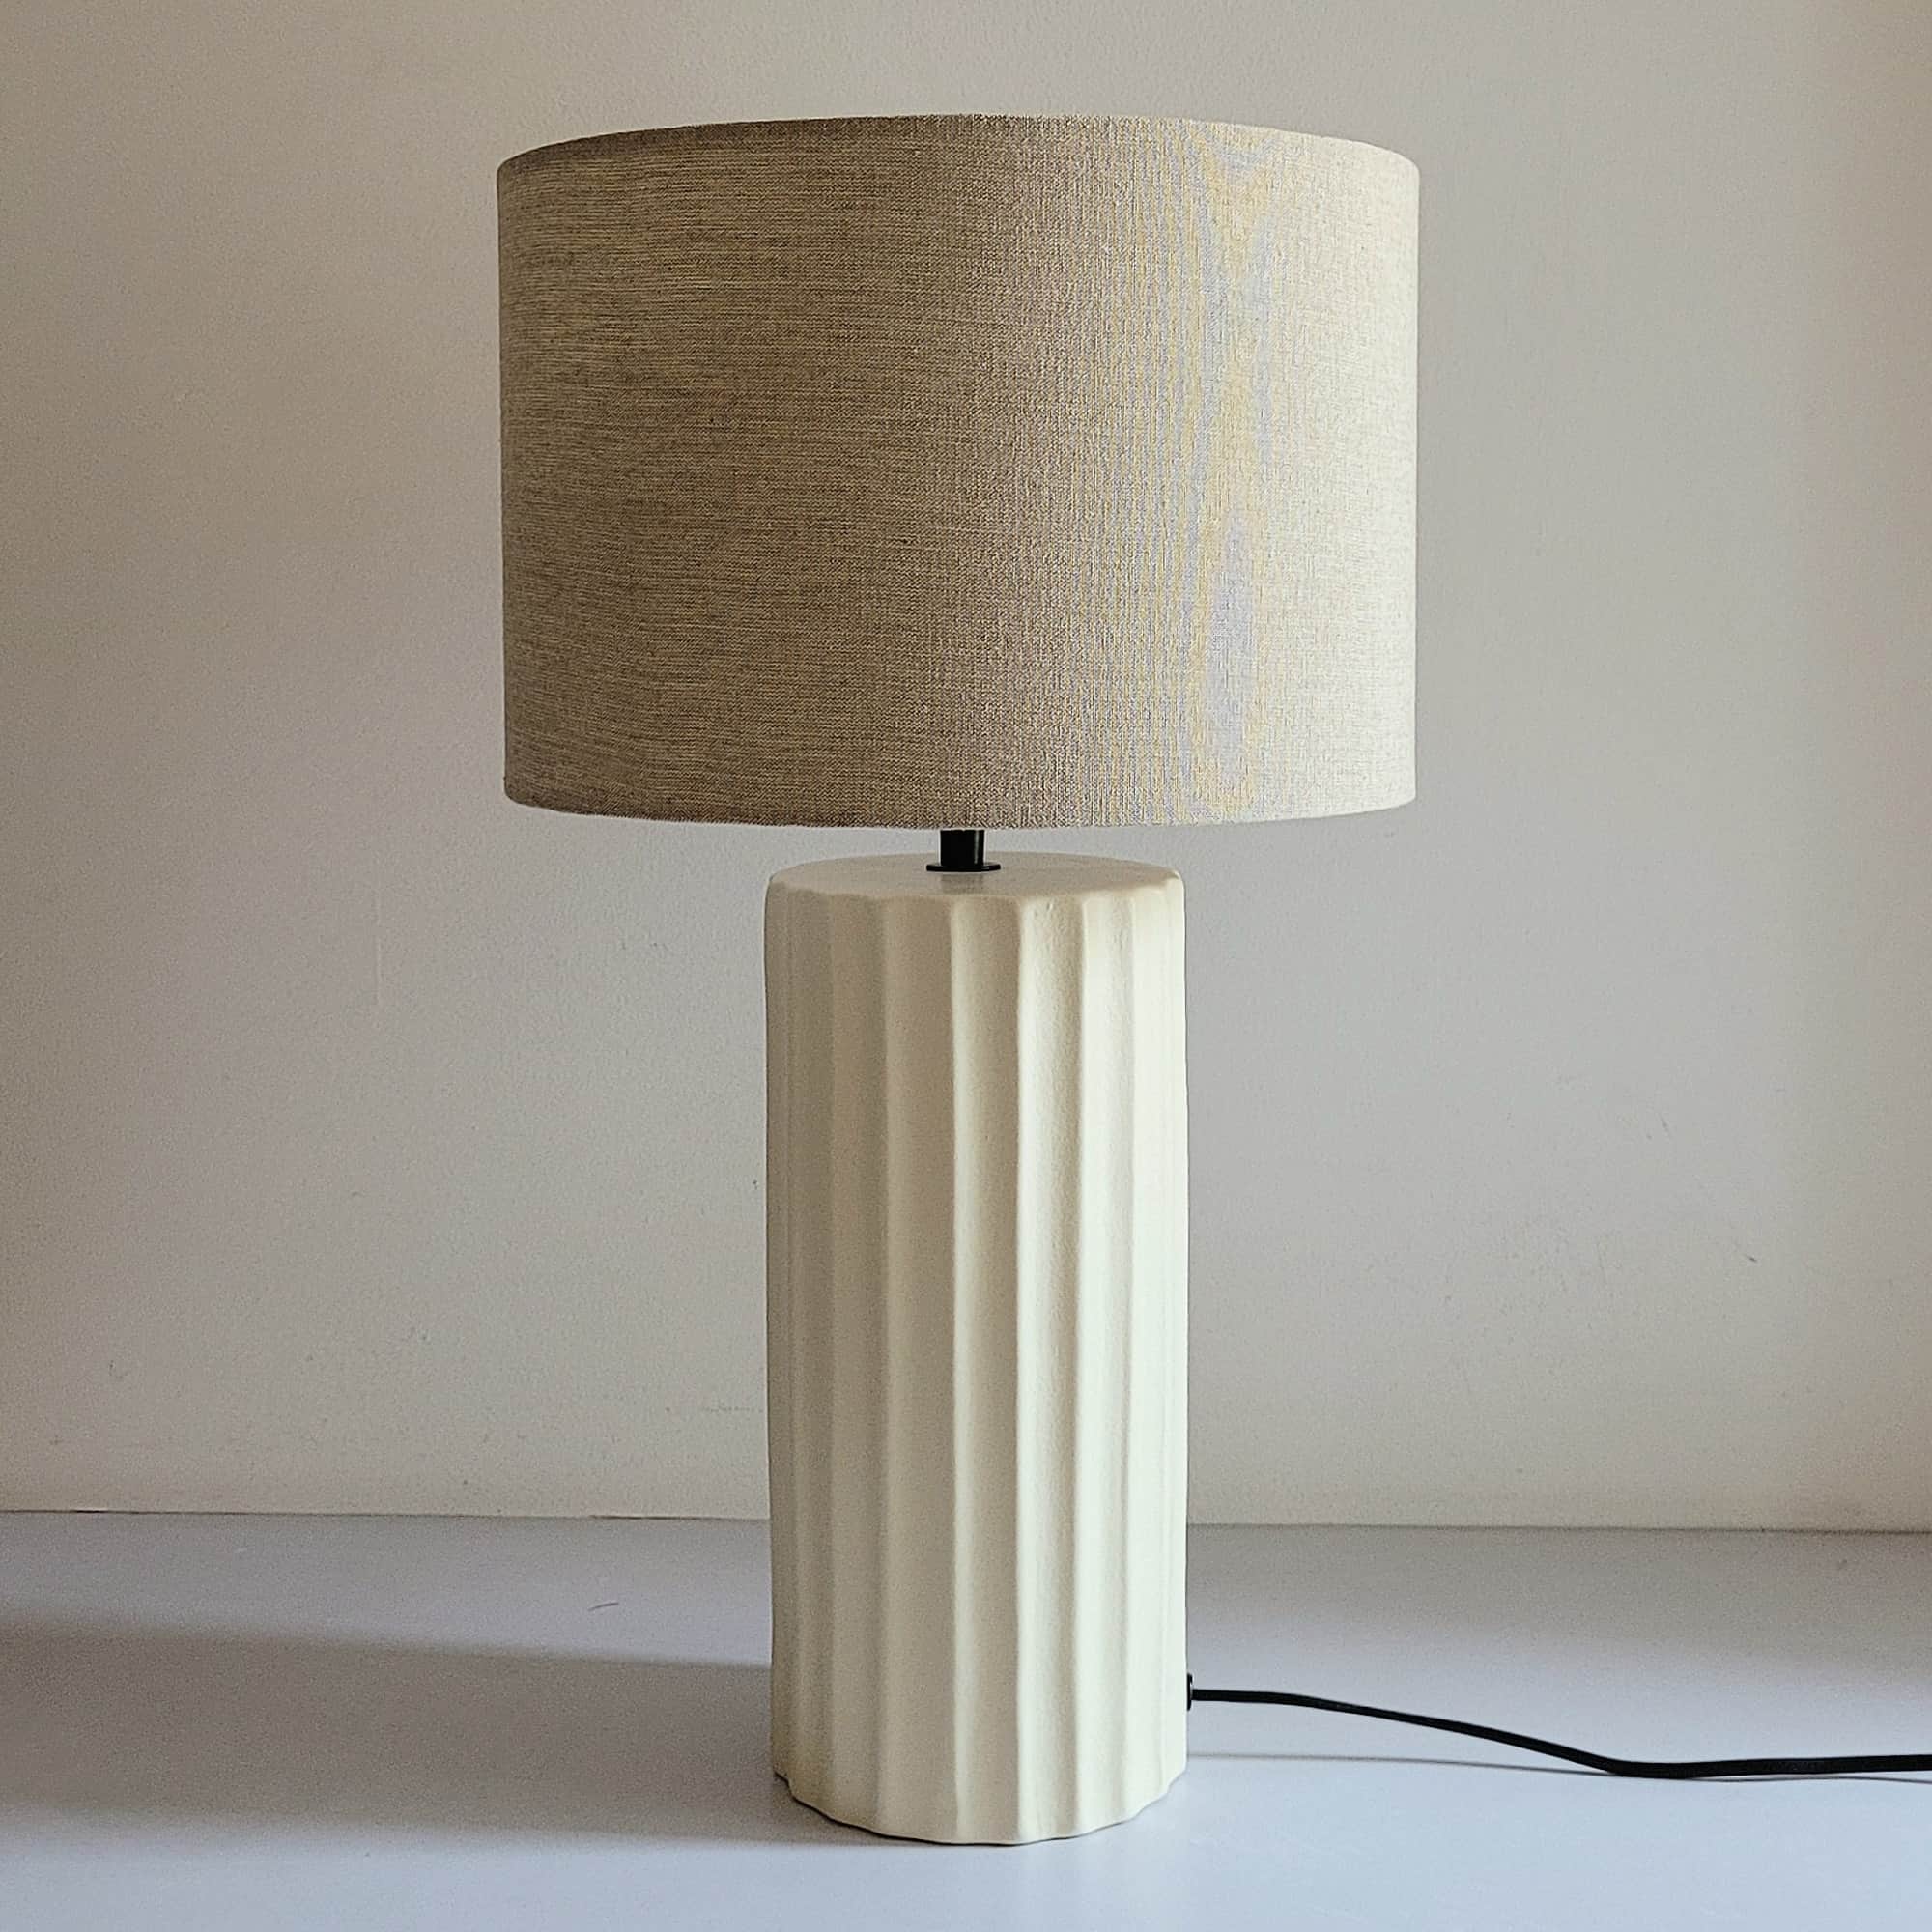 CREAM CREAMIC TABLE LAMP HANDCARVED BASE